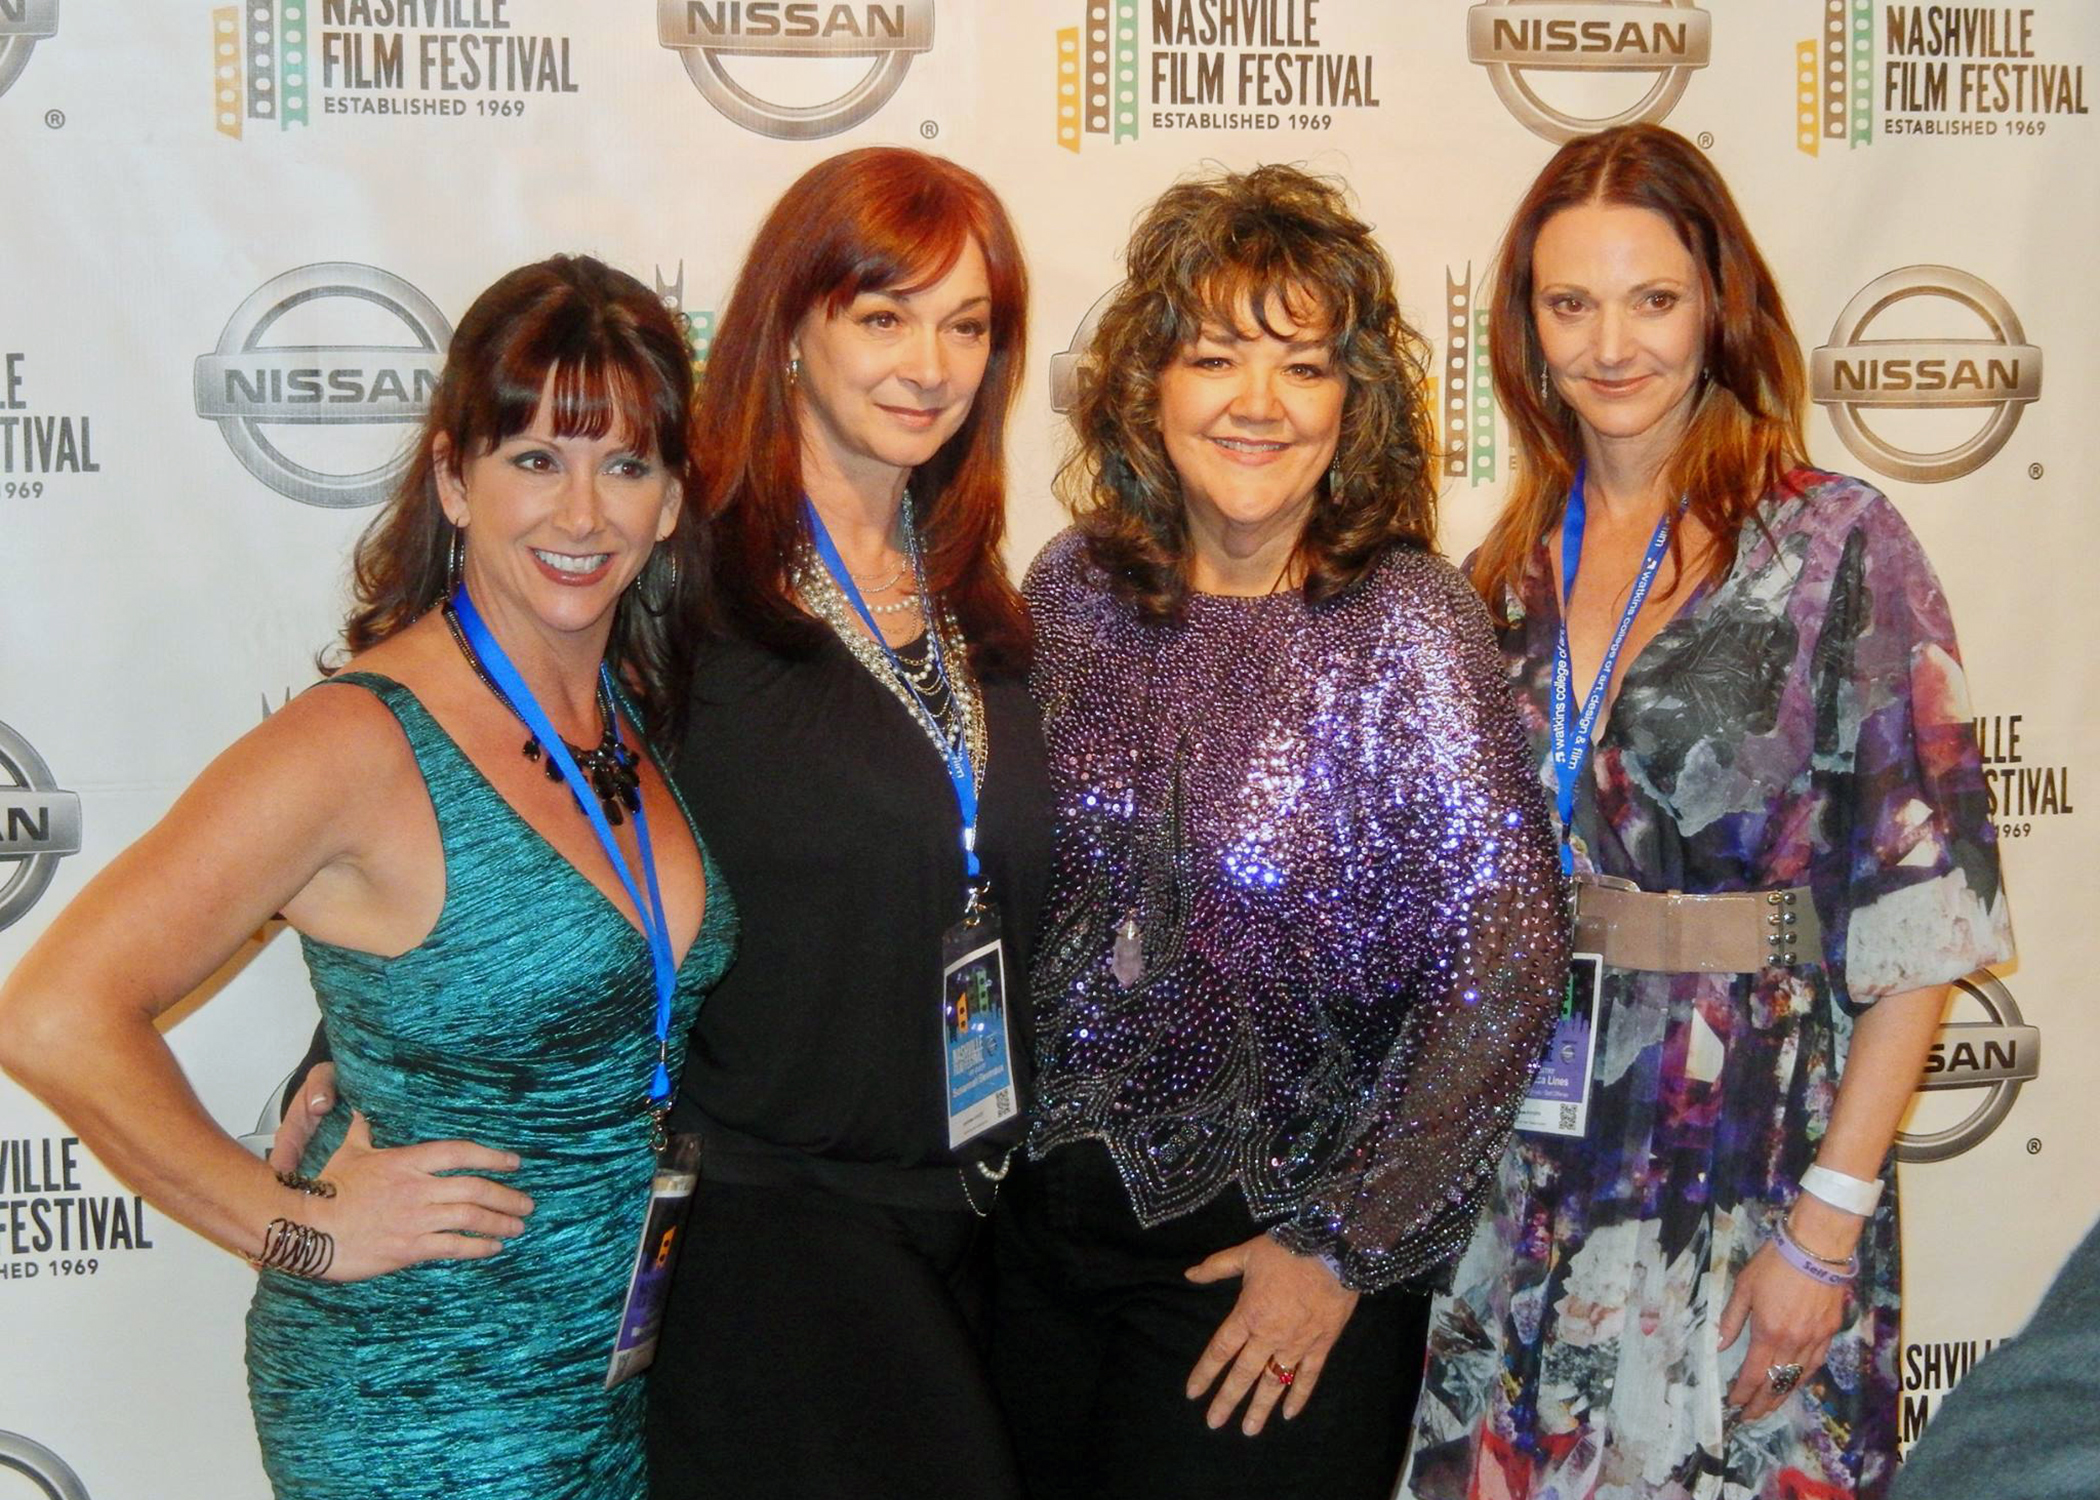 The stars of SELF OFFENSE, Wendy Kusmaul Keeling, Susannah Devereux Carla Christina Contreras and Rebecca Lines.